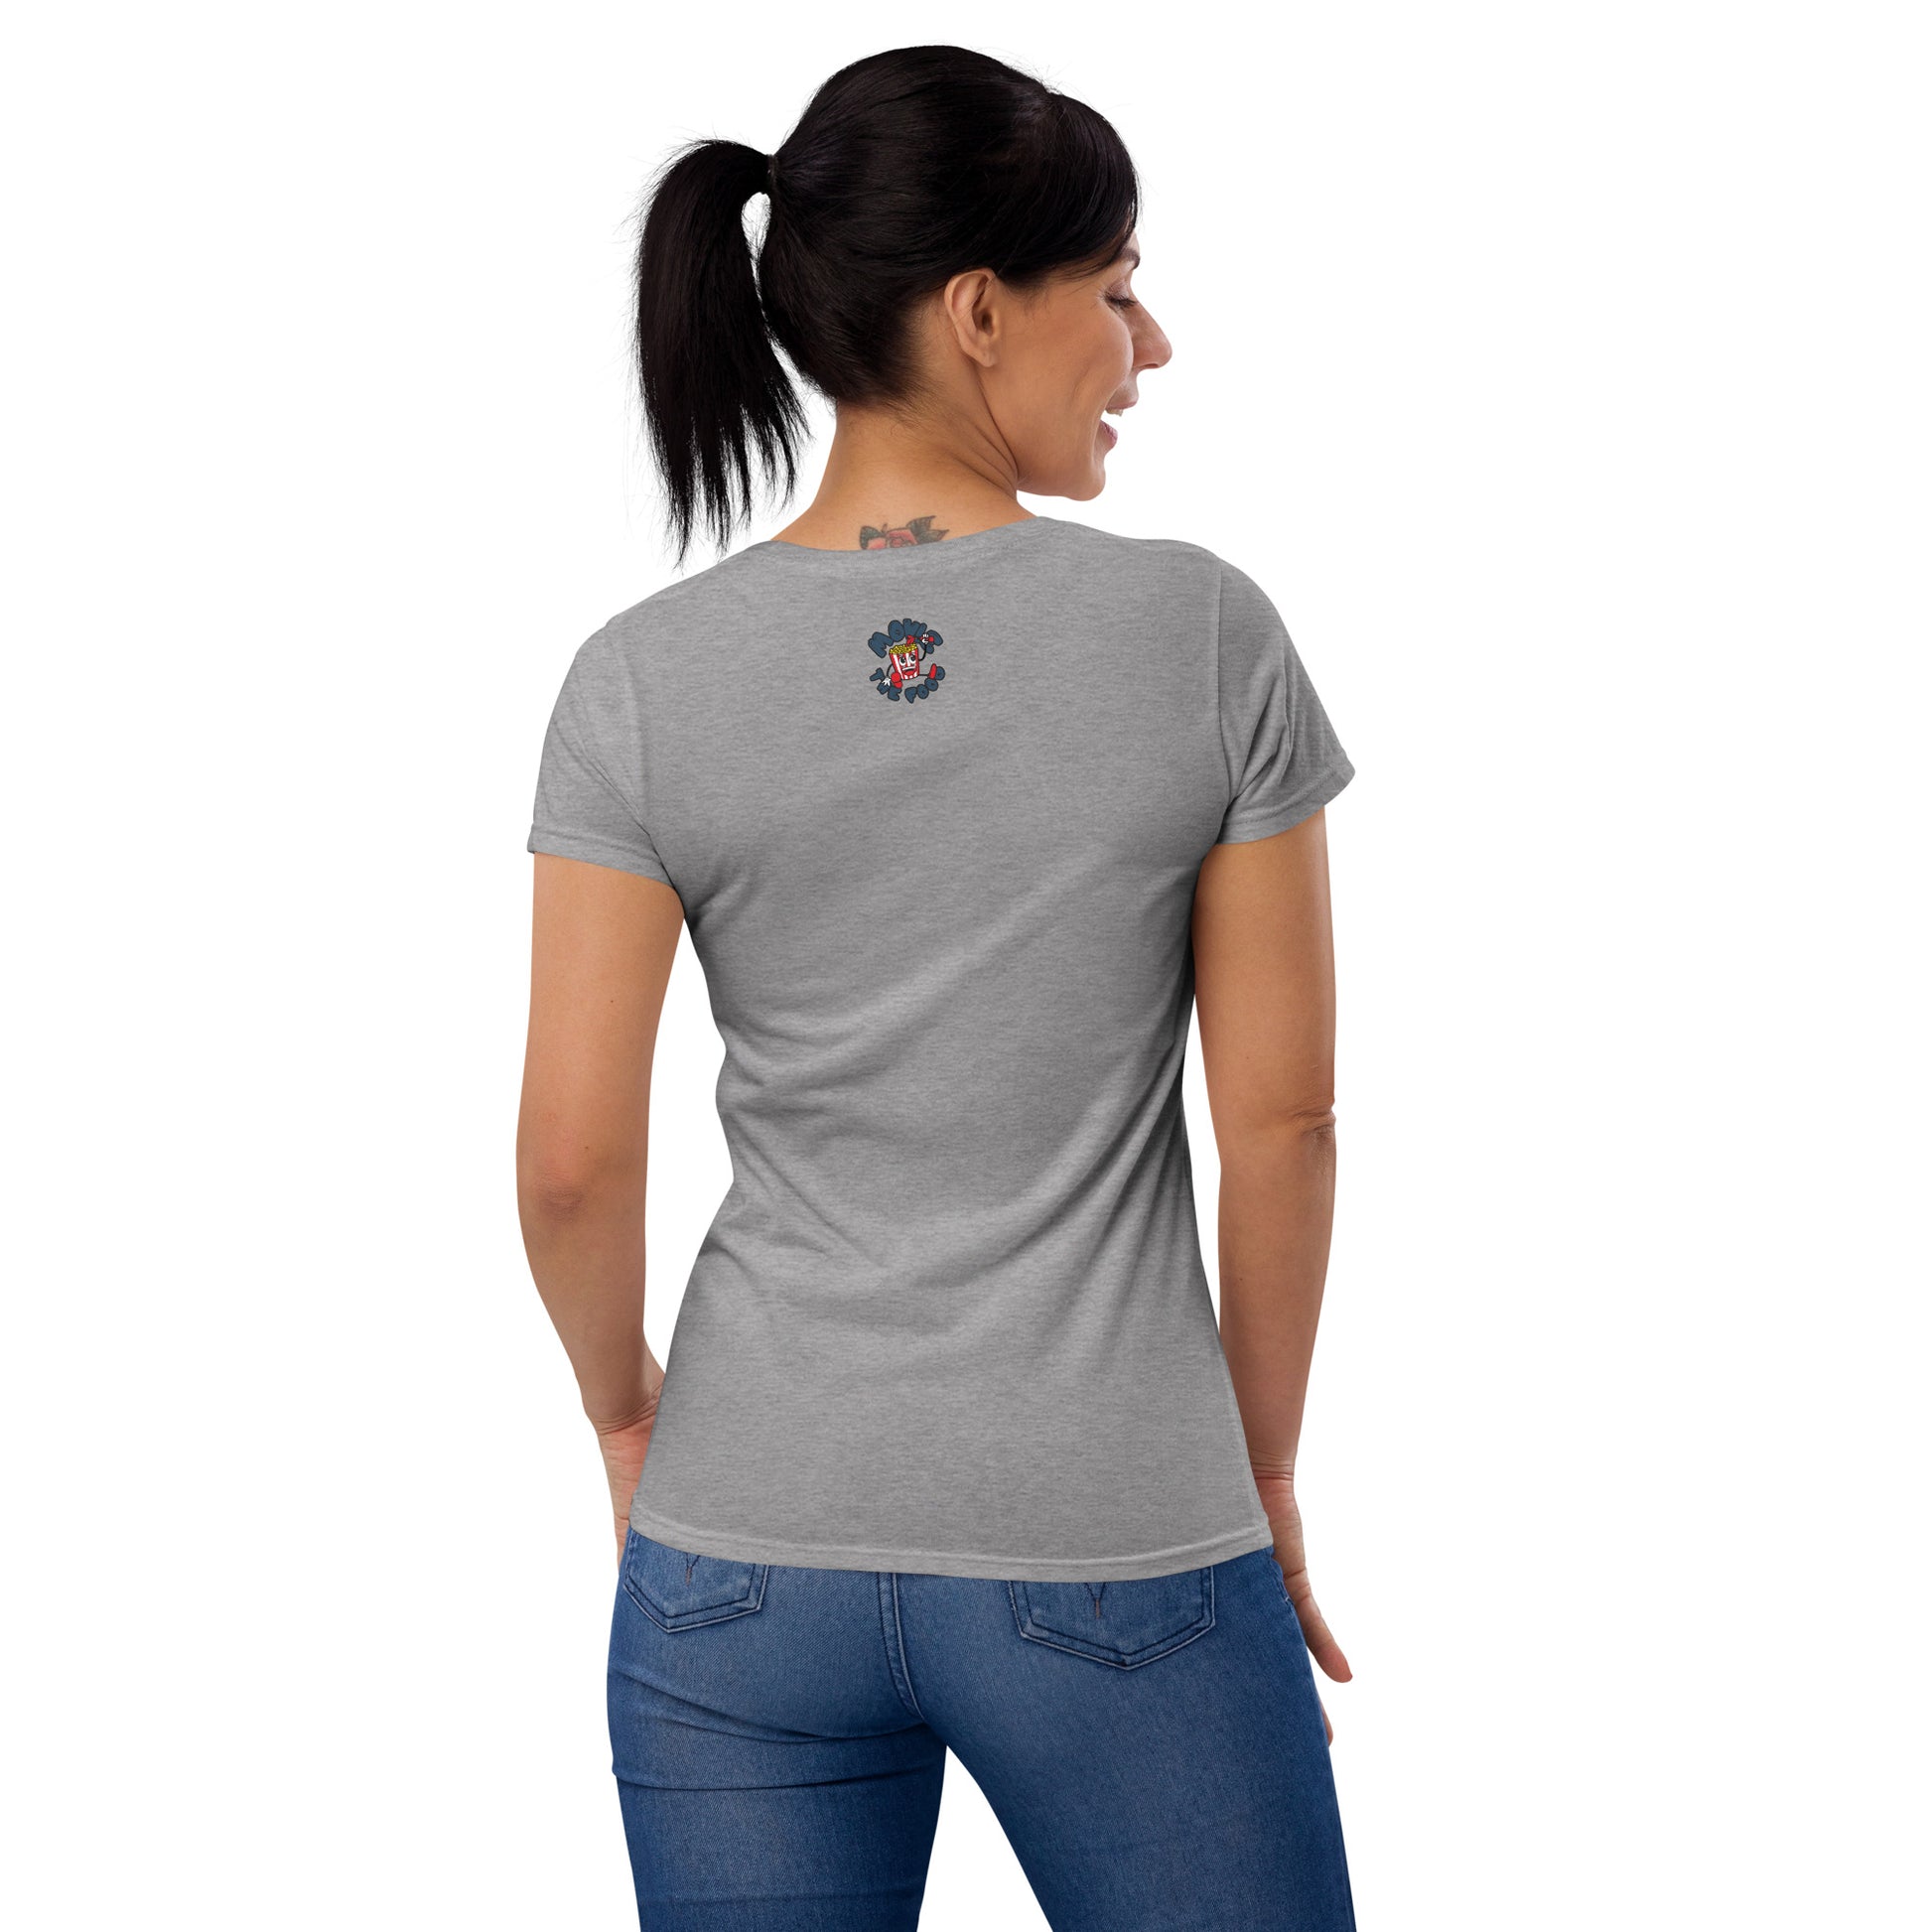 Movie The Food - White Chickens - Women's T-Shirt - Heather Grey - Model Back